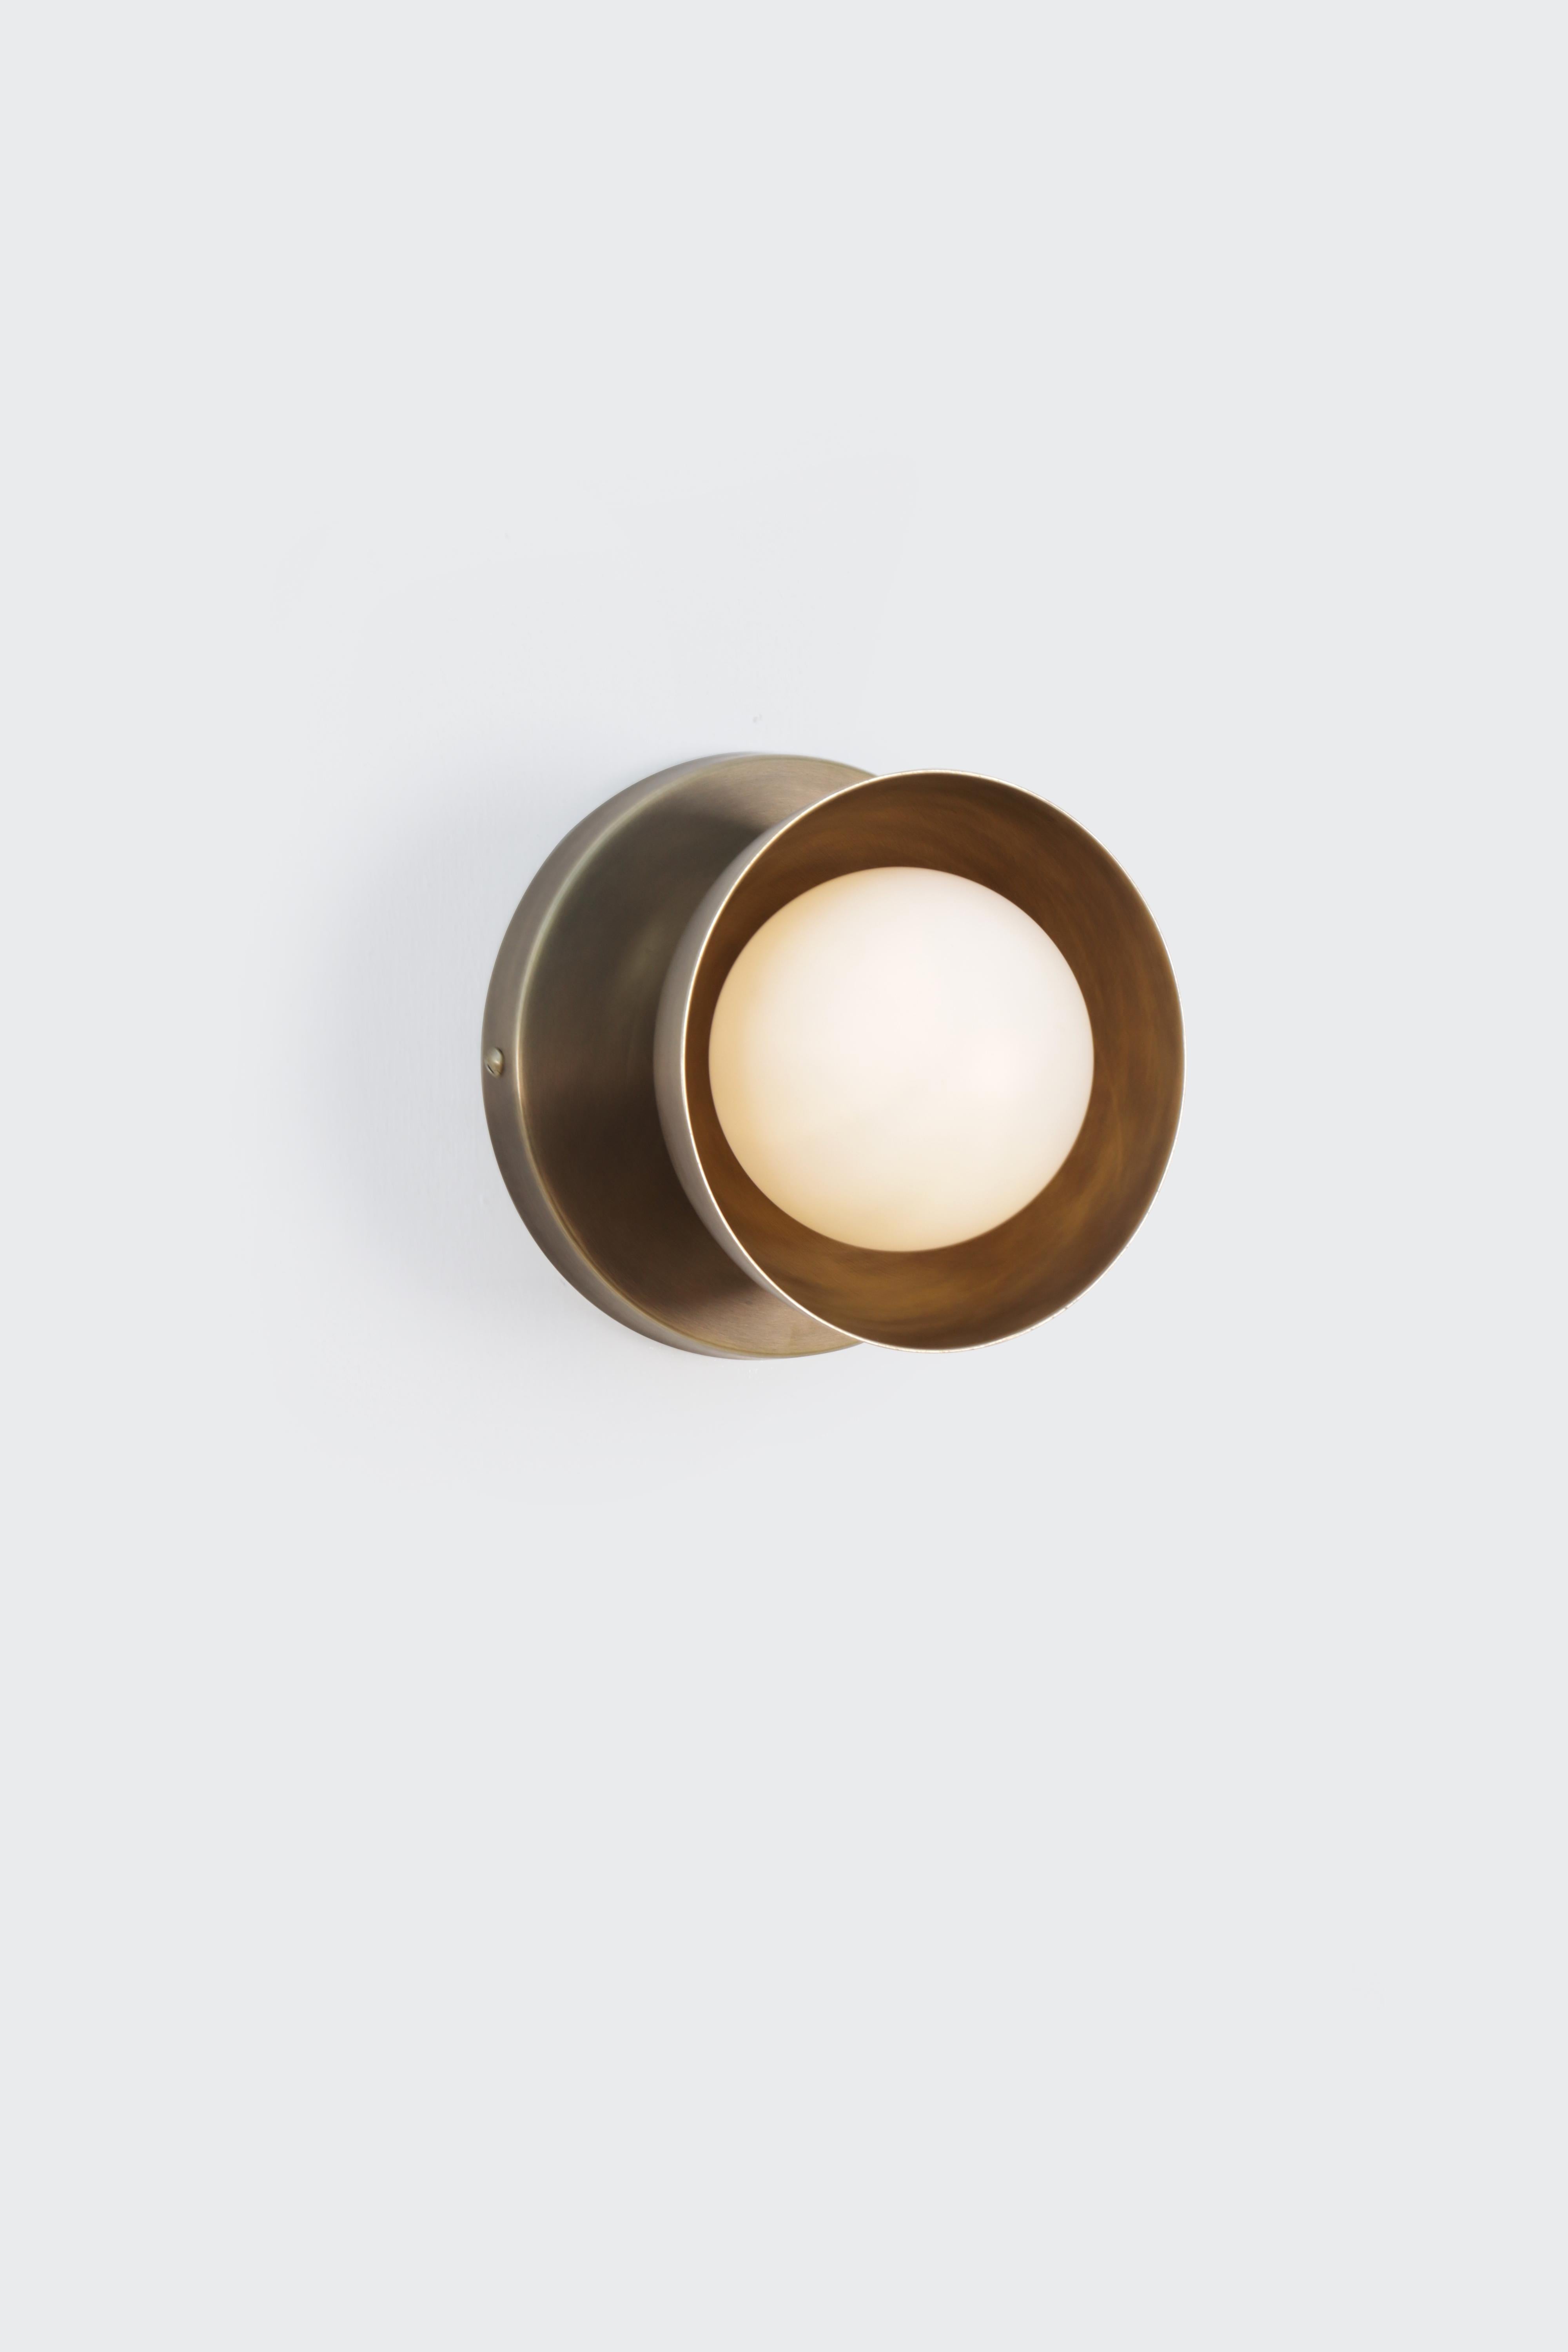 Dew Brass Dome Small Wall Sconce by Lamp Shaper
Dimensions: D 14.5 x W 16.5 x H 16.5 cm.
Materials: Brass and glass.

Different finishes available: raw brass, aged brass, burnt brass and brushed brass Please contact us.

All our lamps can be wired